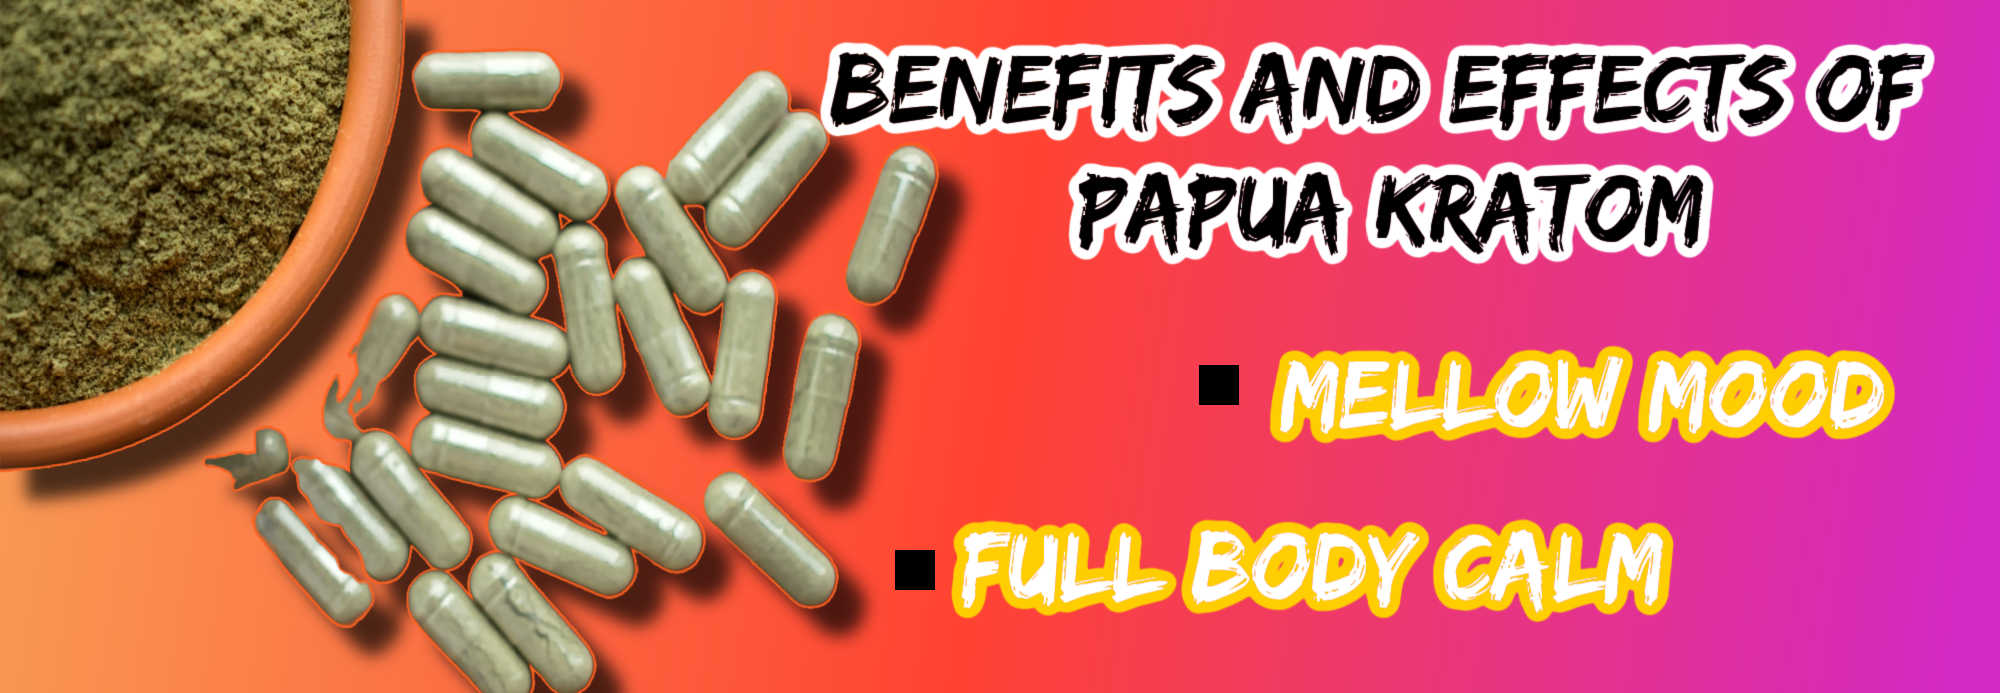 image of papua kratom effects and benefits